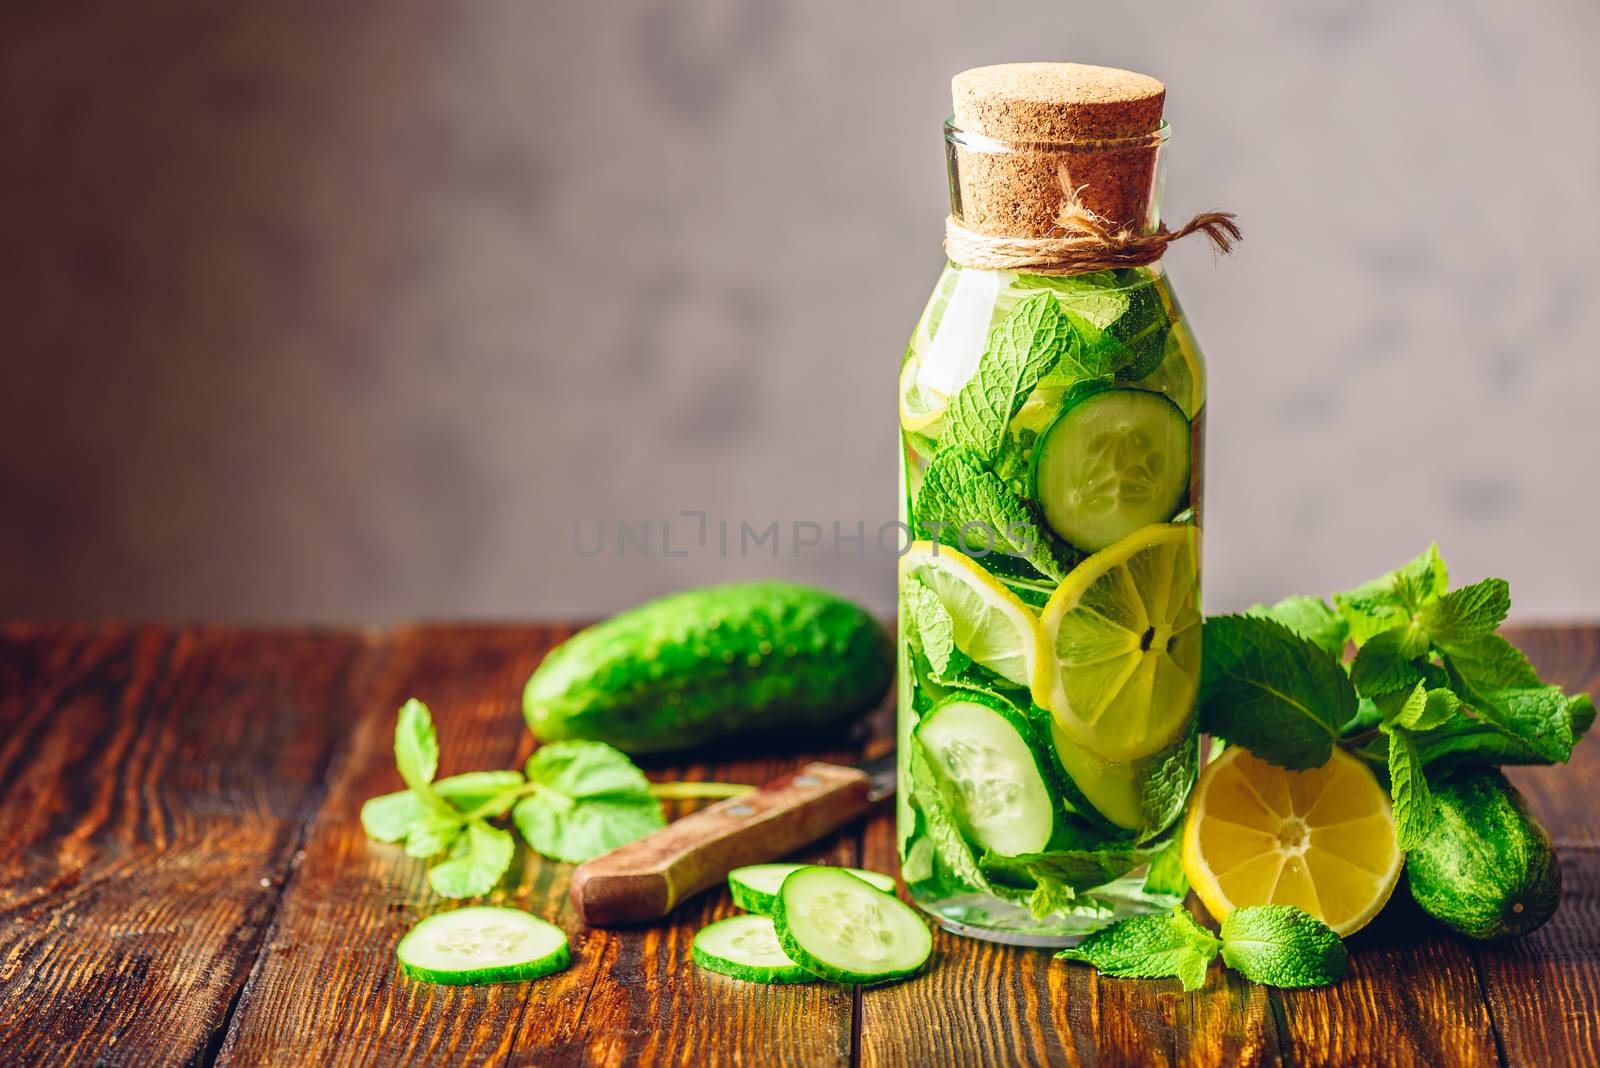 Bottle of Infusion with Sliced Lemon, Cucumber and Fresh Mint Leaves. Ingredients and Knife on Table. Copy Space on the Left.